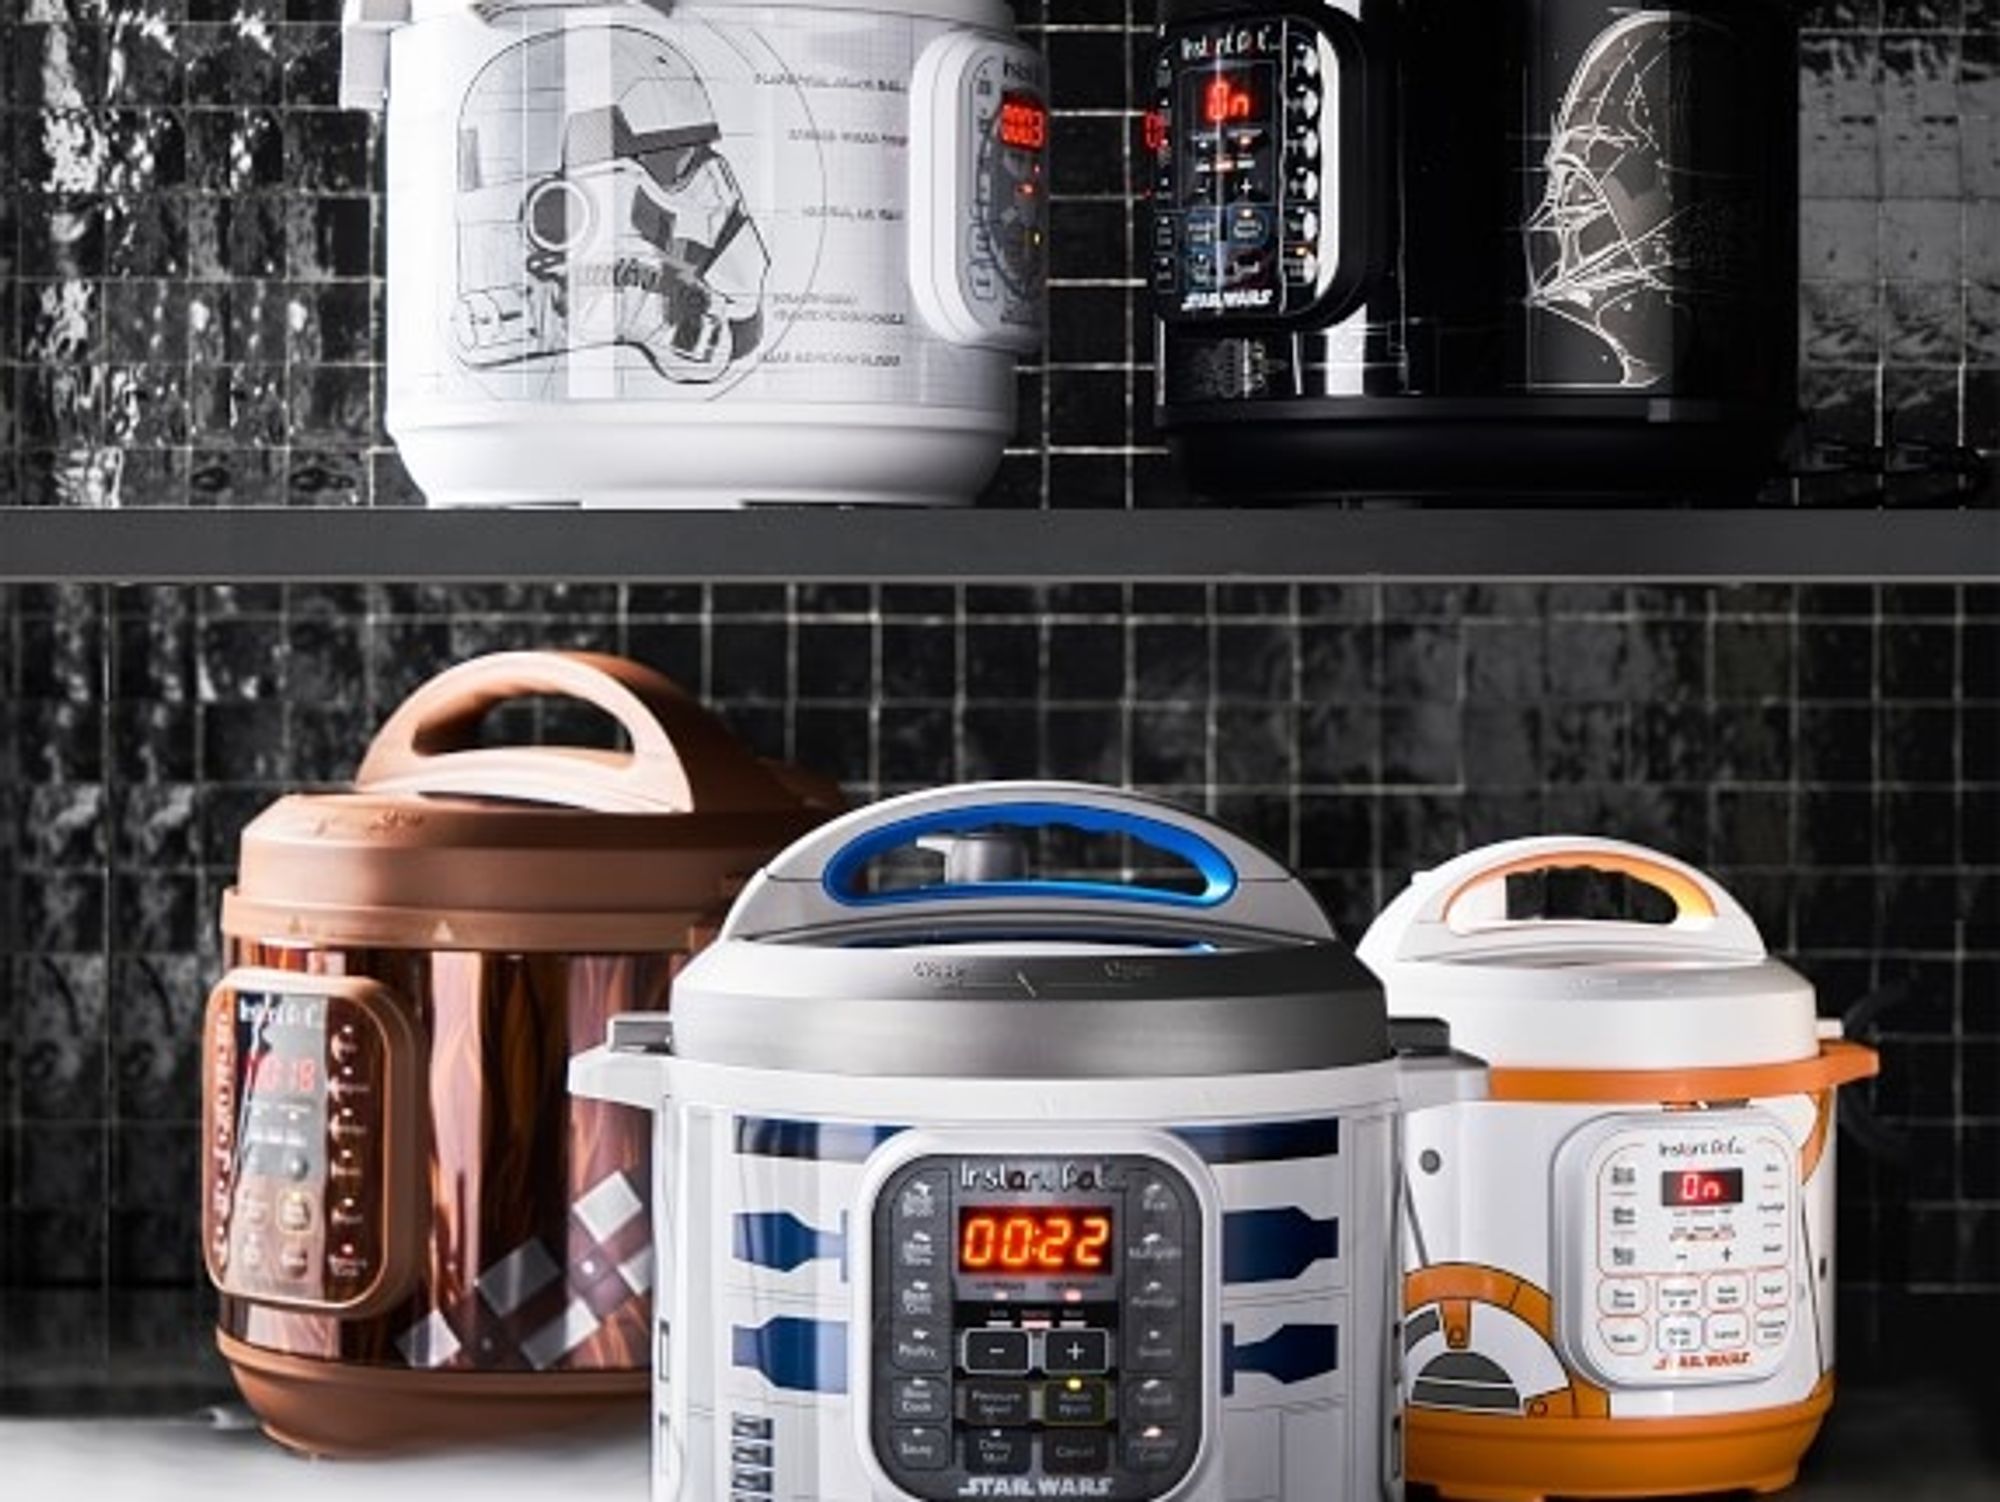 Star Wars Instant Pots hit an all-time low just ahead of May the 4th